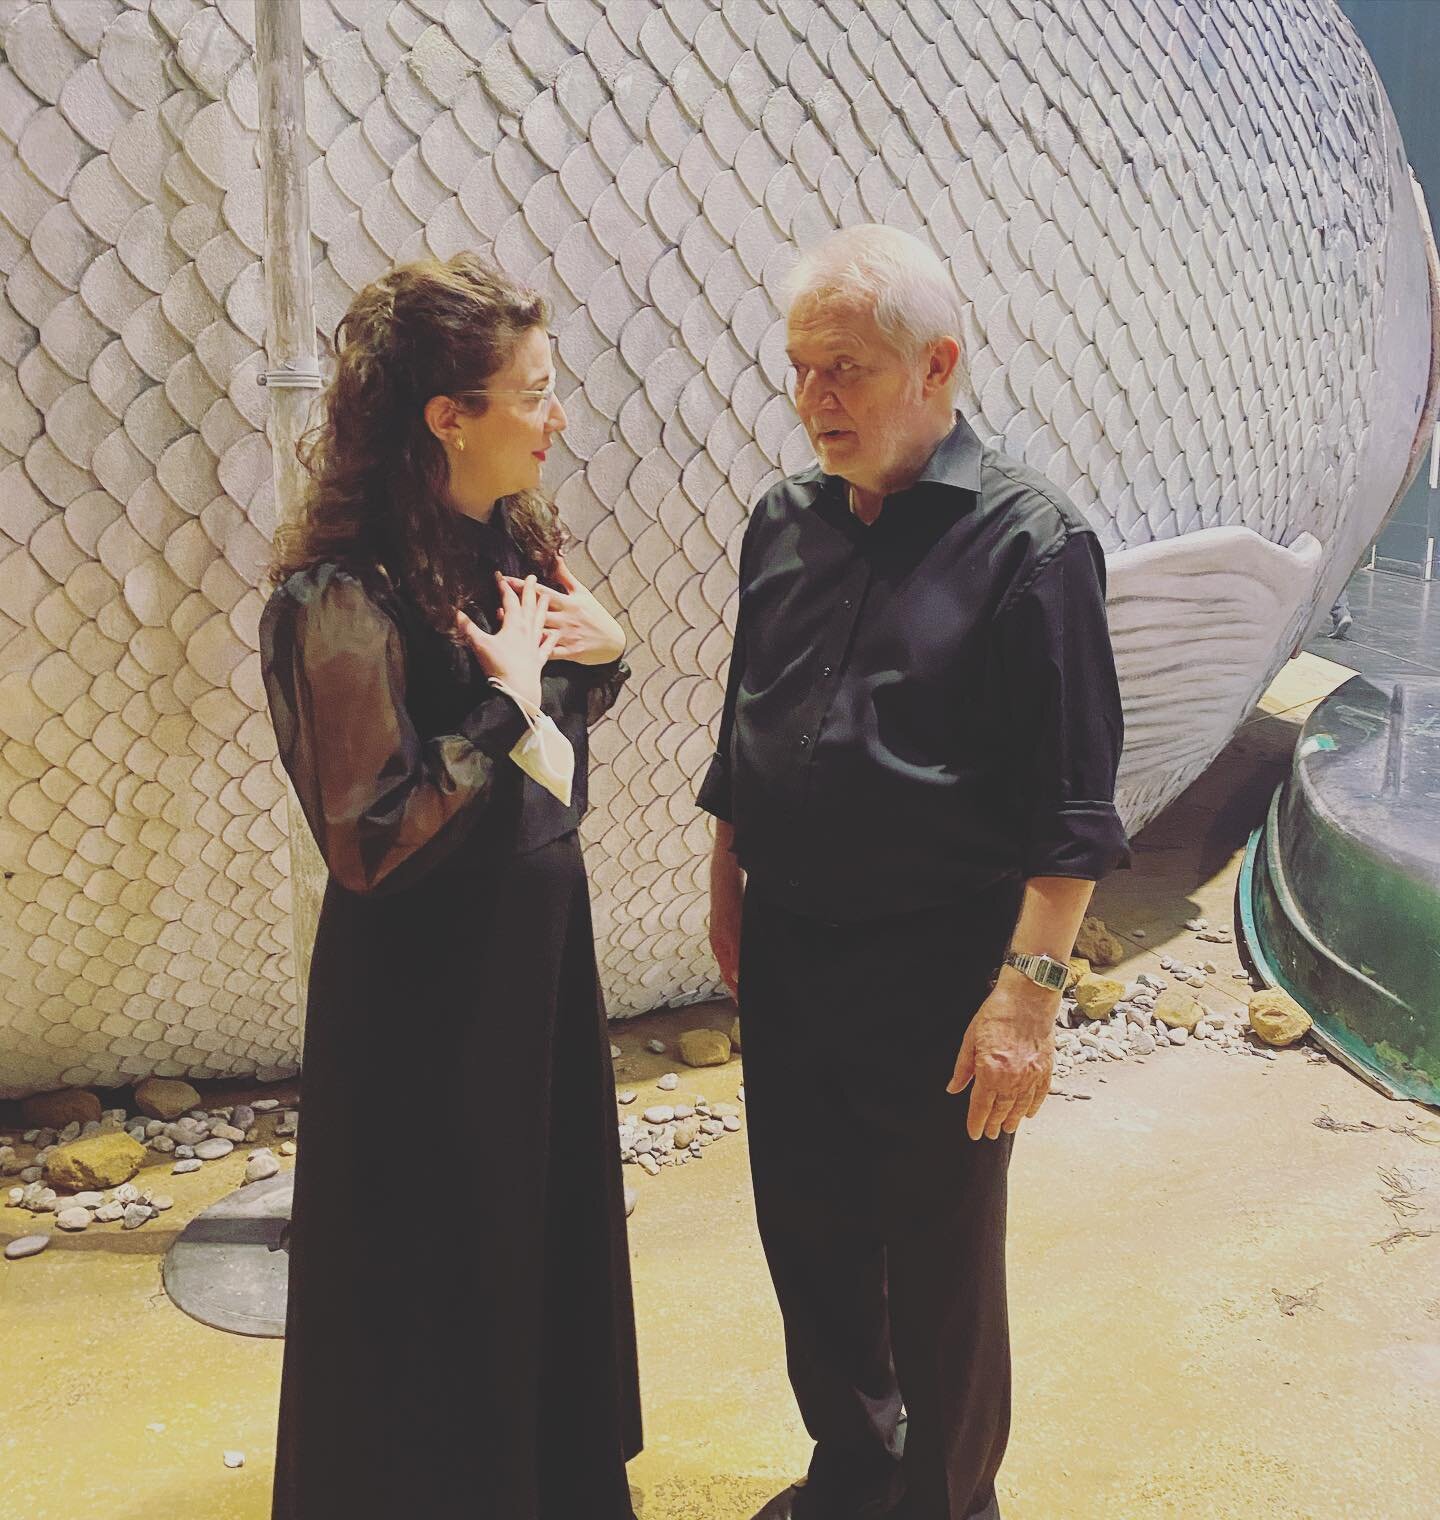 A candid photo of a post-show chat with the wonderful composer and conductor of SLEEPLESS, Peter E&ouml;tv&ouml;s. I'm so grateful I get to sing @staatsoperberlin (again) and in this intriguing, hauntingly beautiful new opera- under the baton of the 